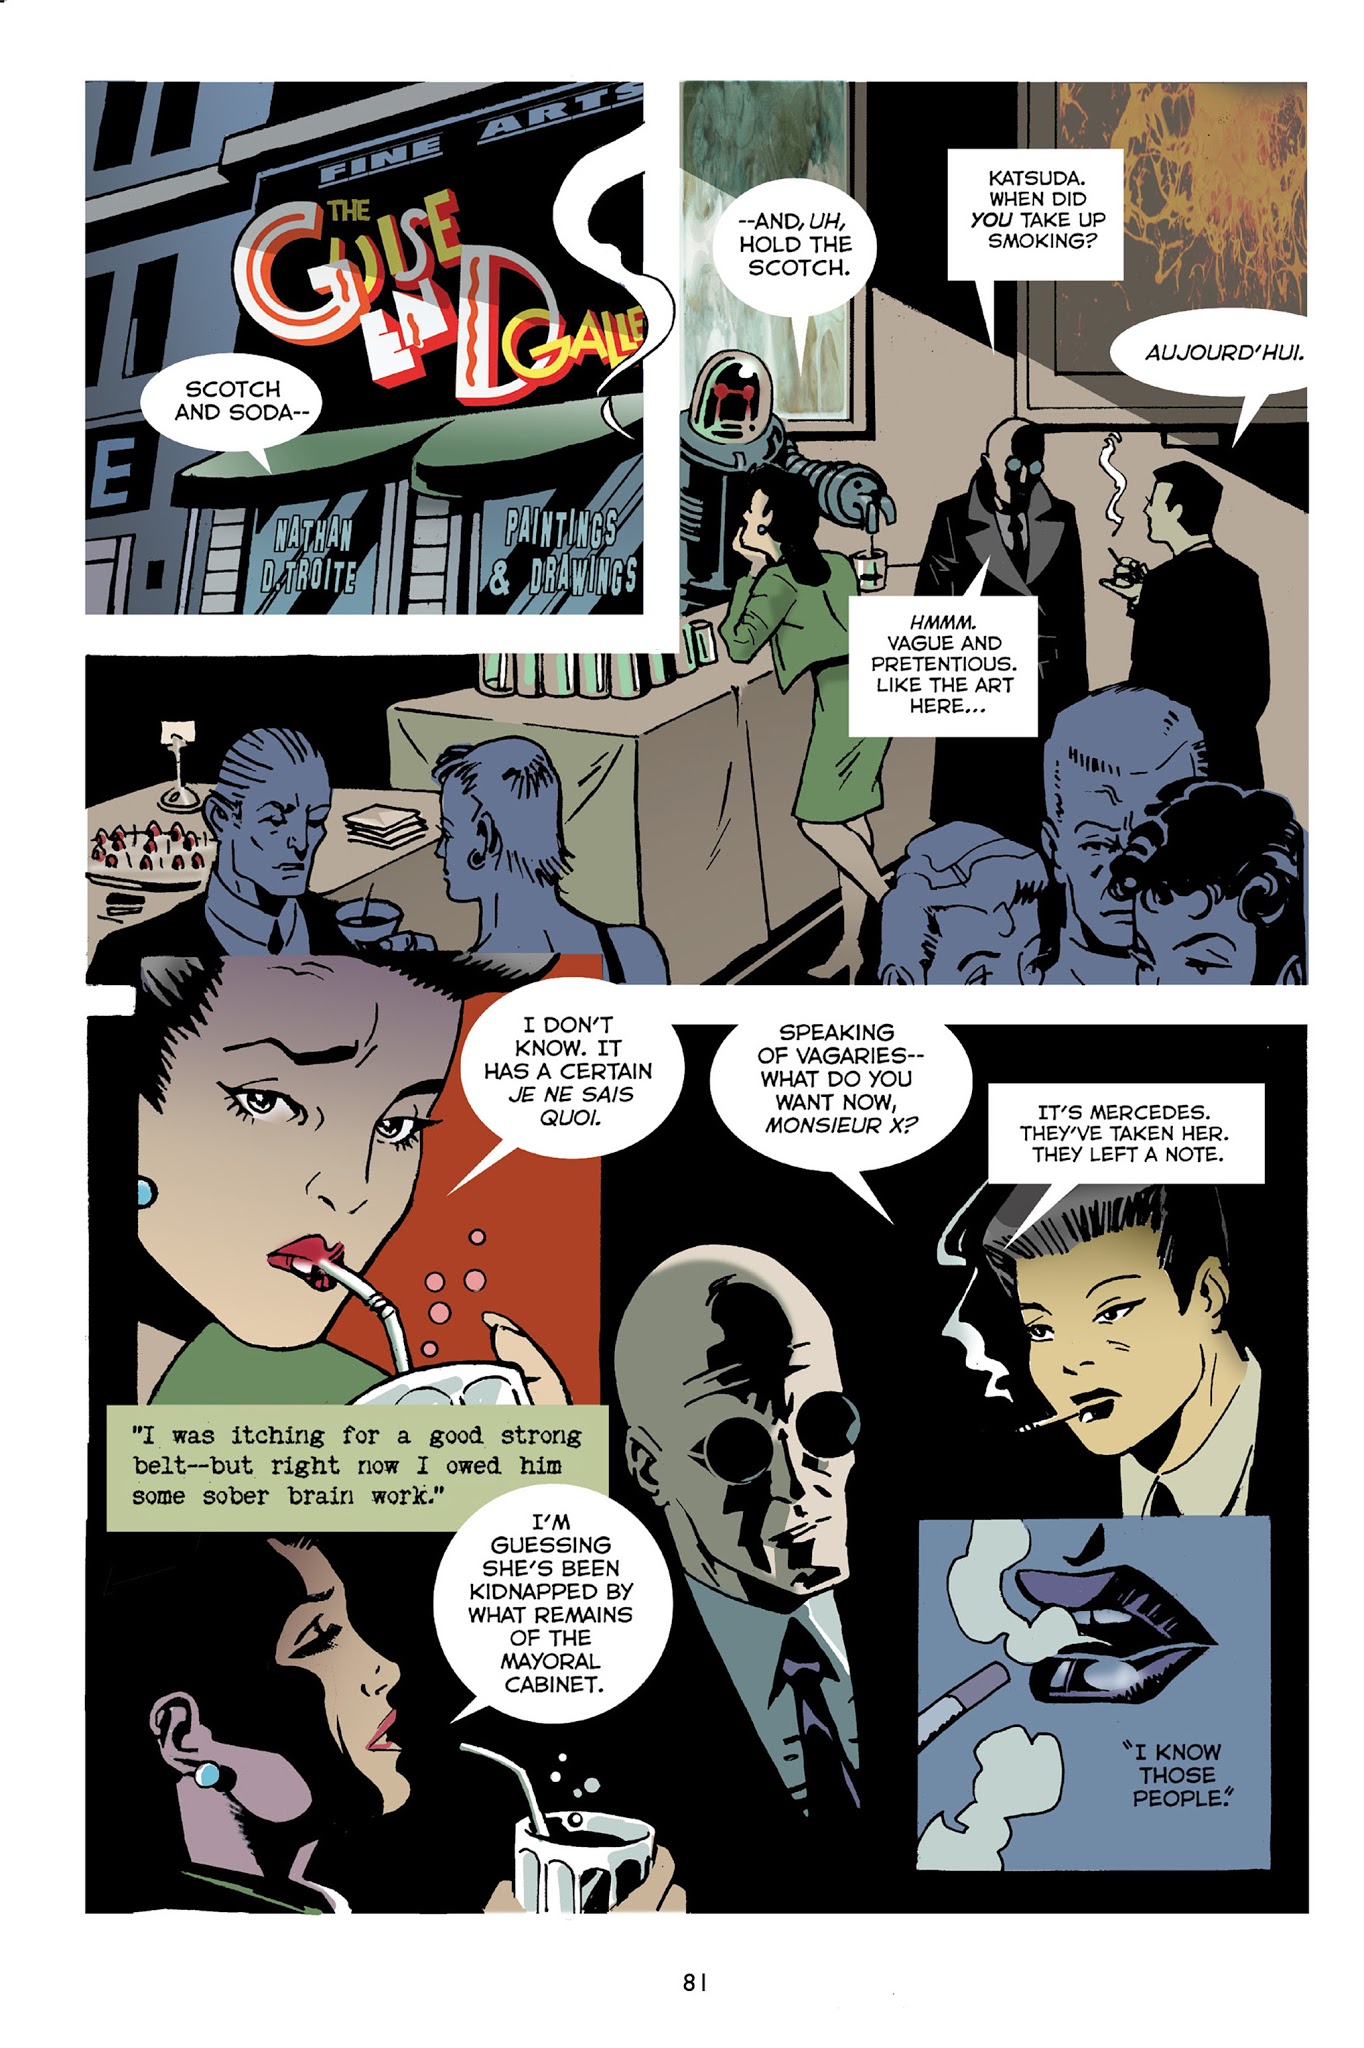 Read online Mister X: Eviction comic -  Issue # TPB - 80